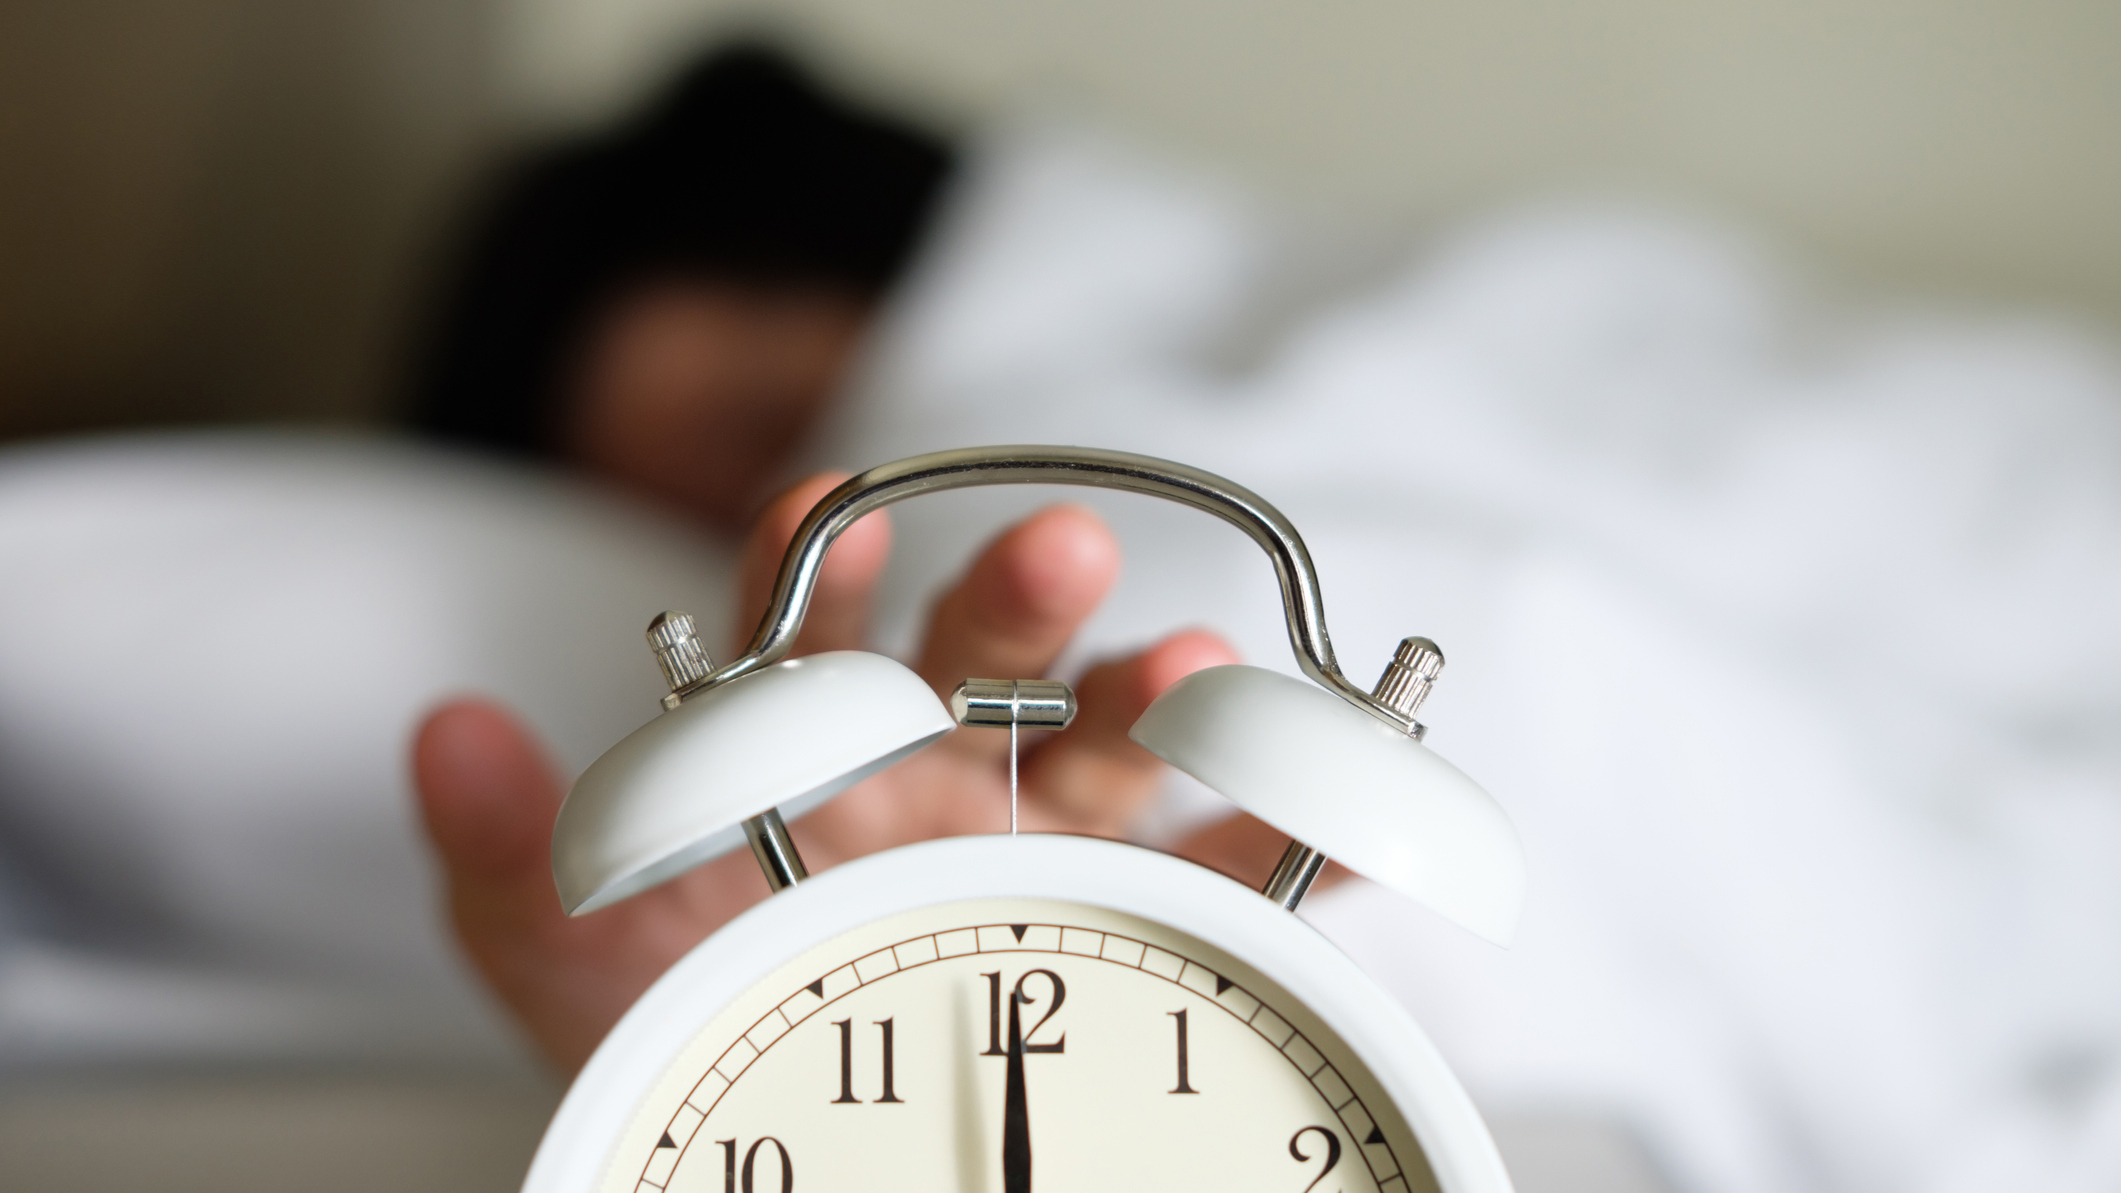 A woman with dark hair taps the top of a white alarm clock to stop it from ringing